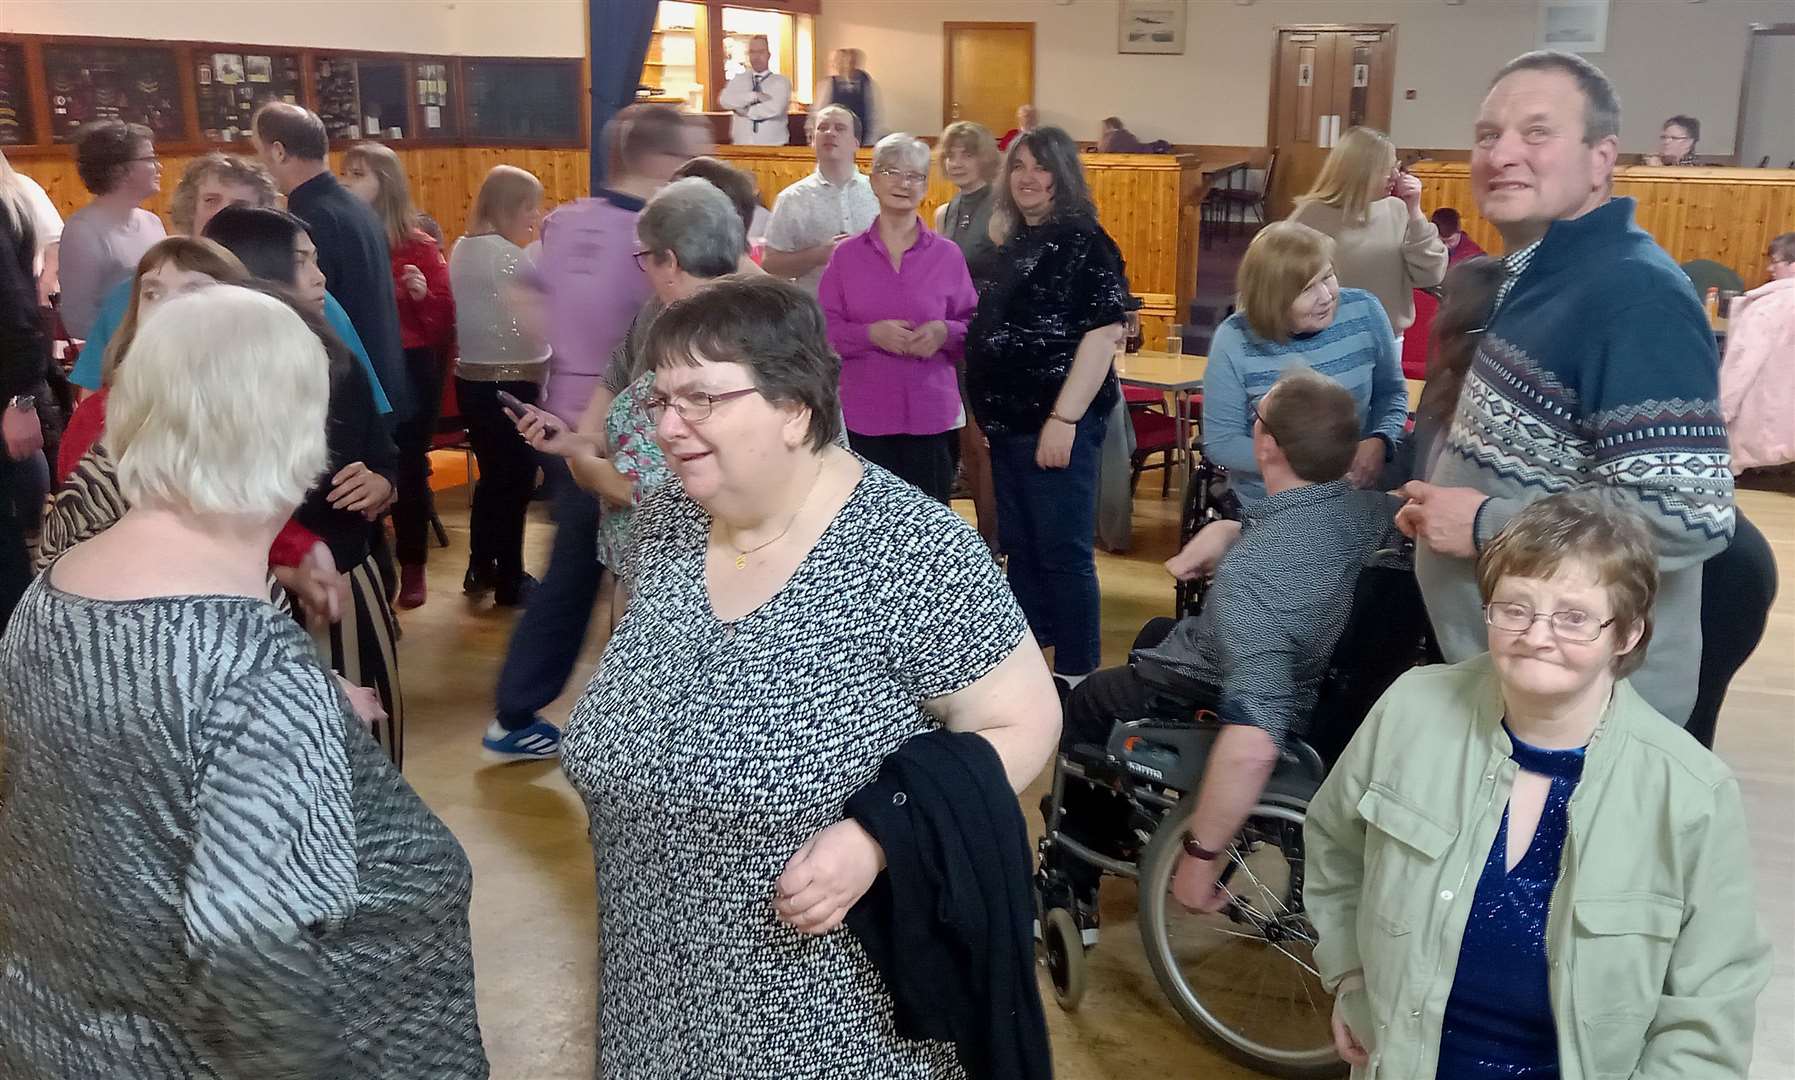 The Legion dance hall was busy throughout the evening.